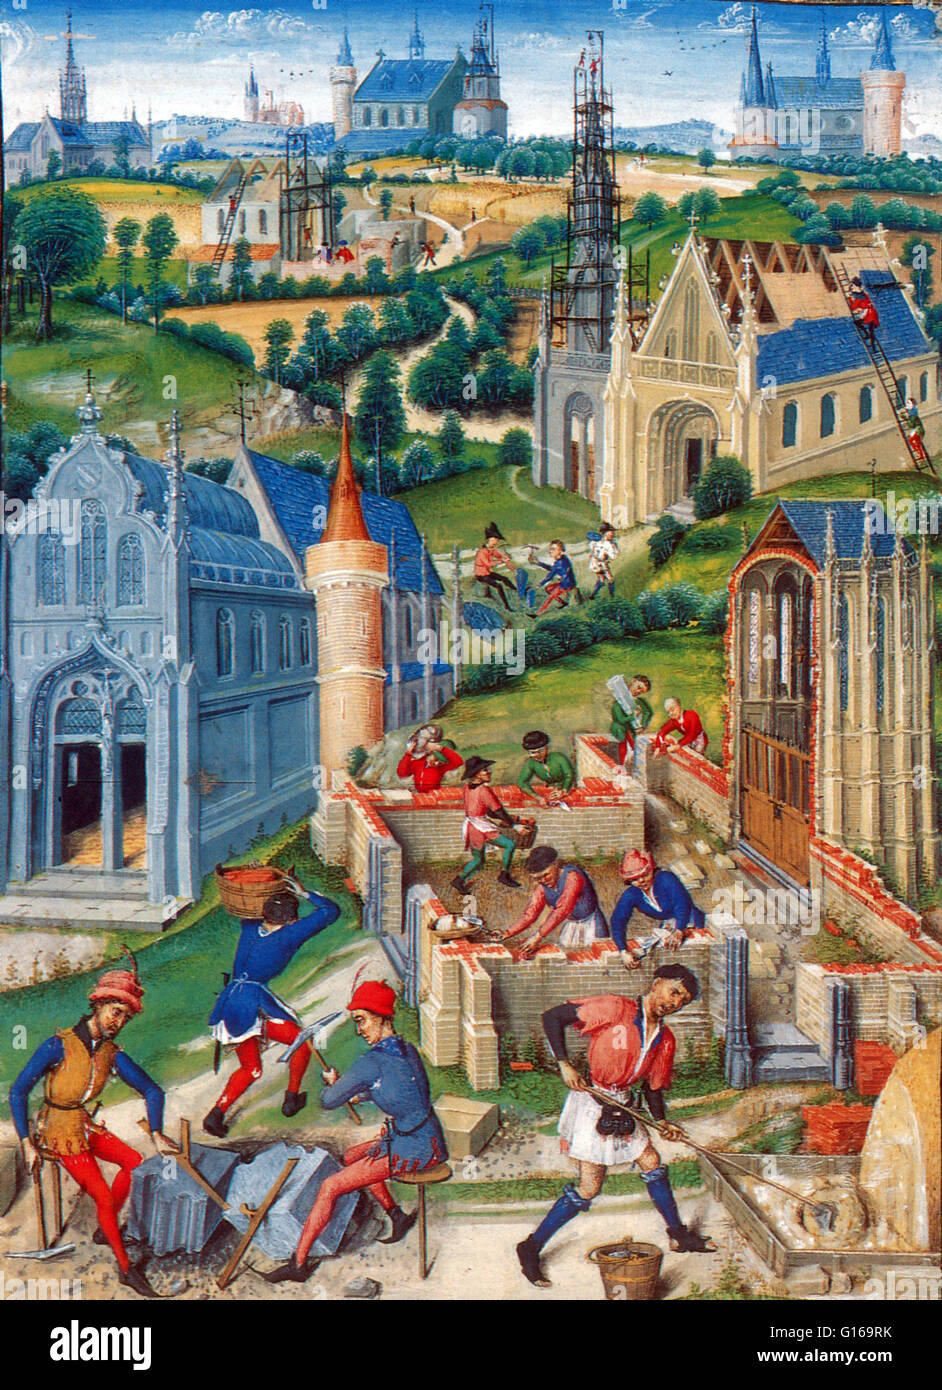 Illuminated manuscript from the Chronicle Girart Roussillon depicting the construction of a church in France, 1448. In the Middle Ages of Europe fortifications, castles and cathedrals were the greatest construction projects. Fine stone masonry was used on Stock Photo